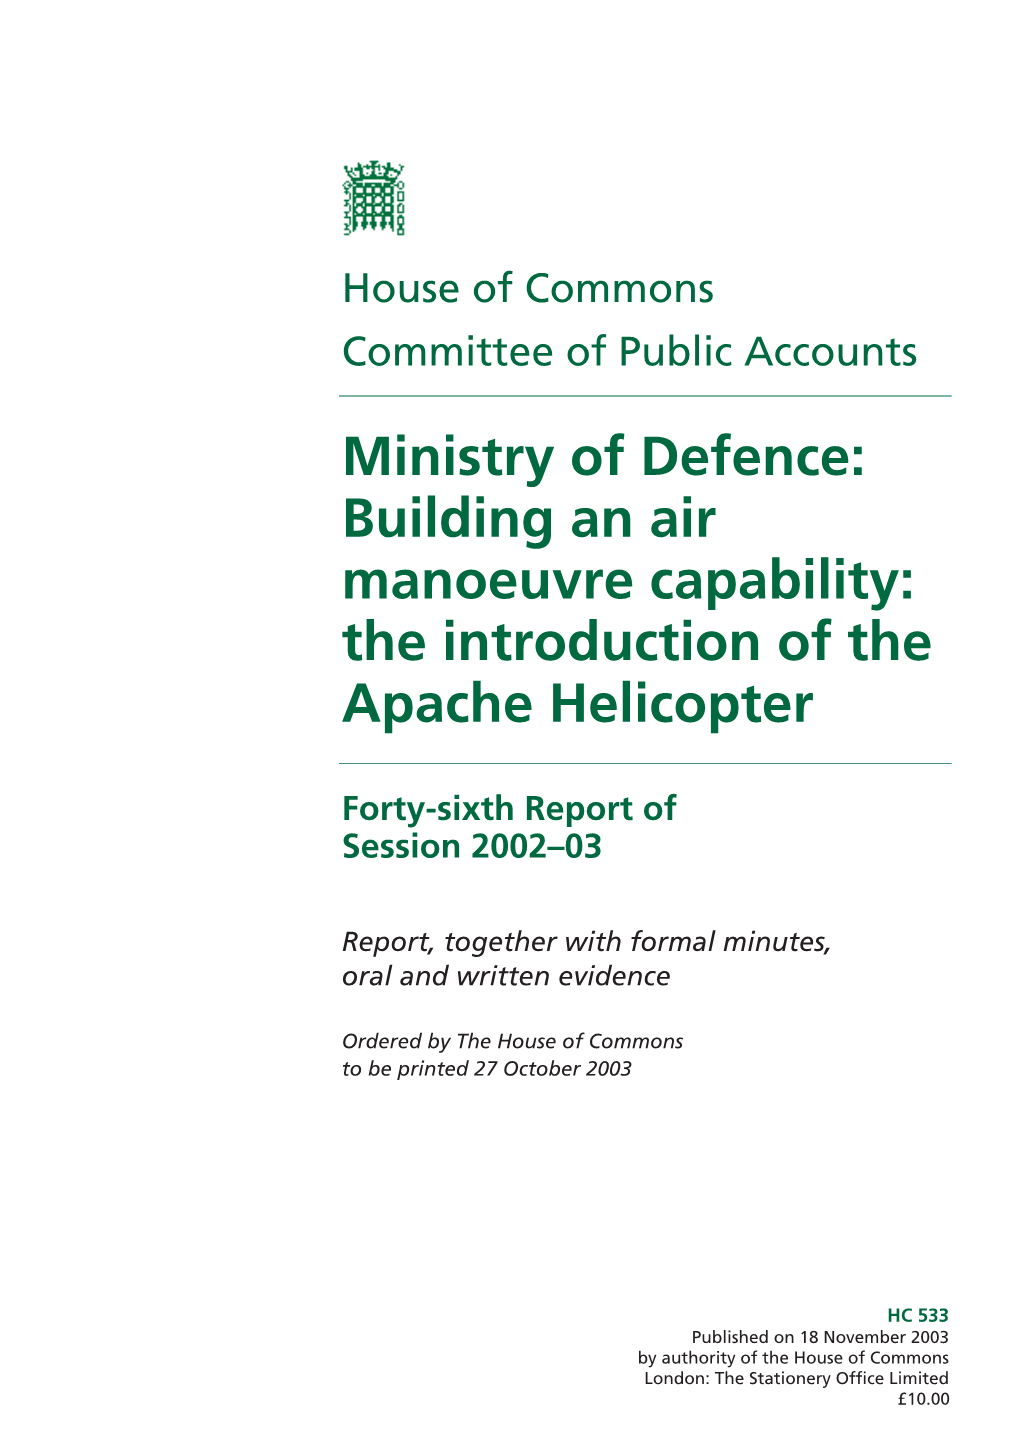 Ministry of Defence: Building an Air Manoeuvre Capability: the Introduction of the Apache Helicopter